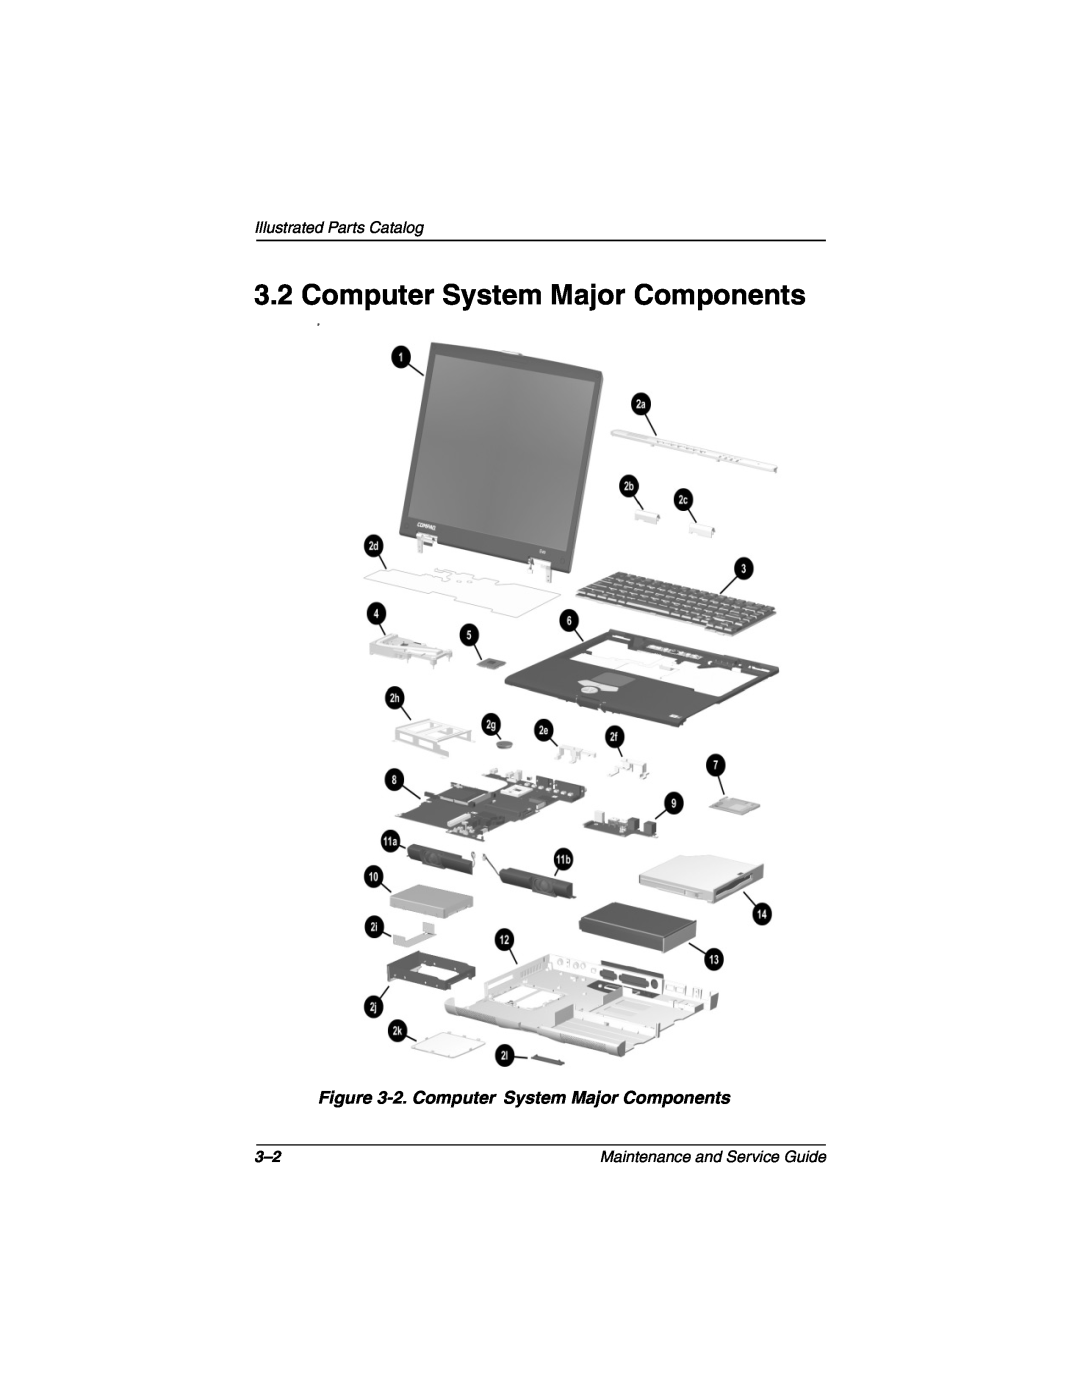 Compaq N160 manual 2. Computer System Major Components, Illustrated Parts Catalog, Maintenance and Service Guide 